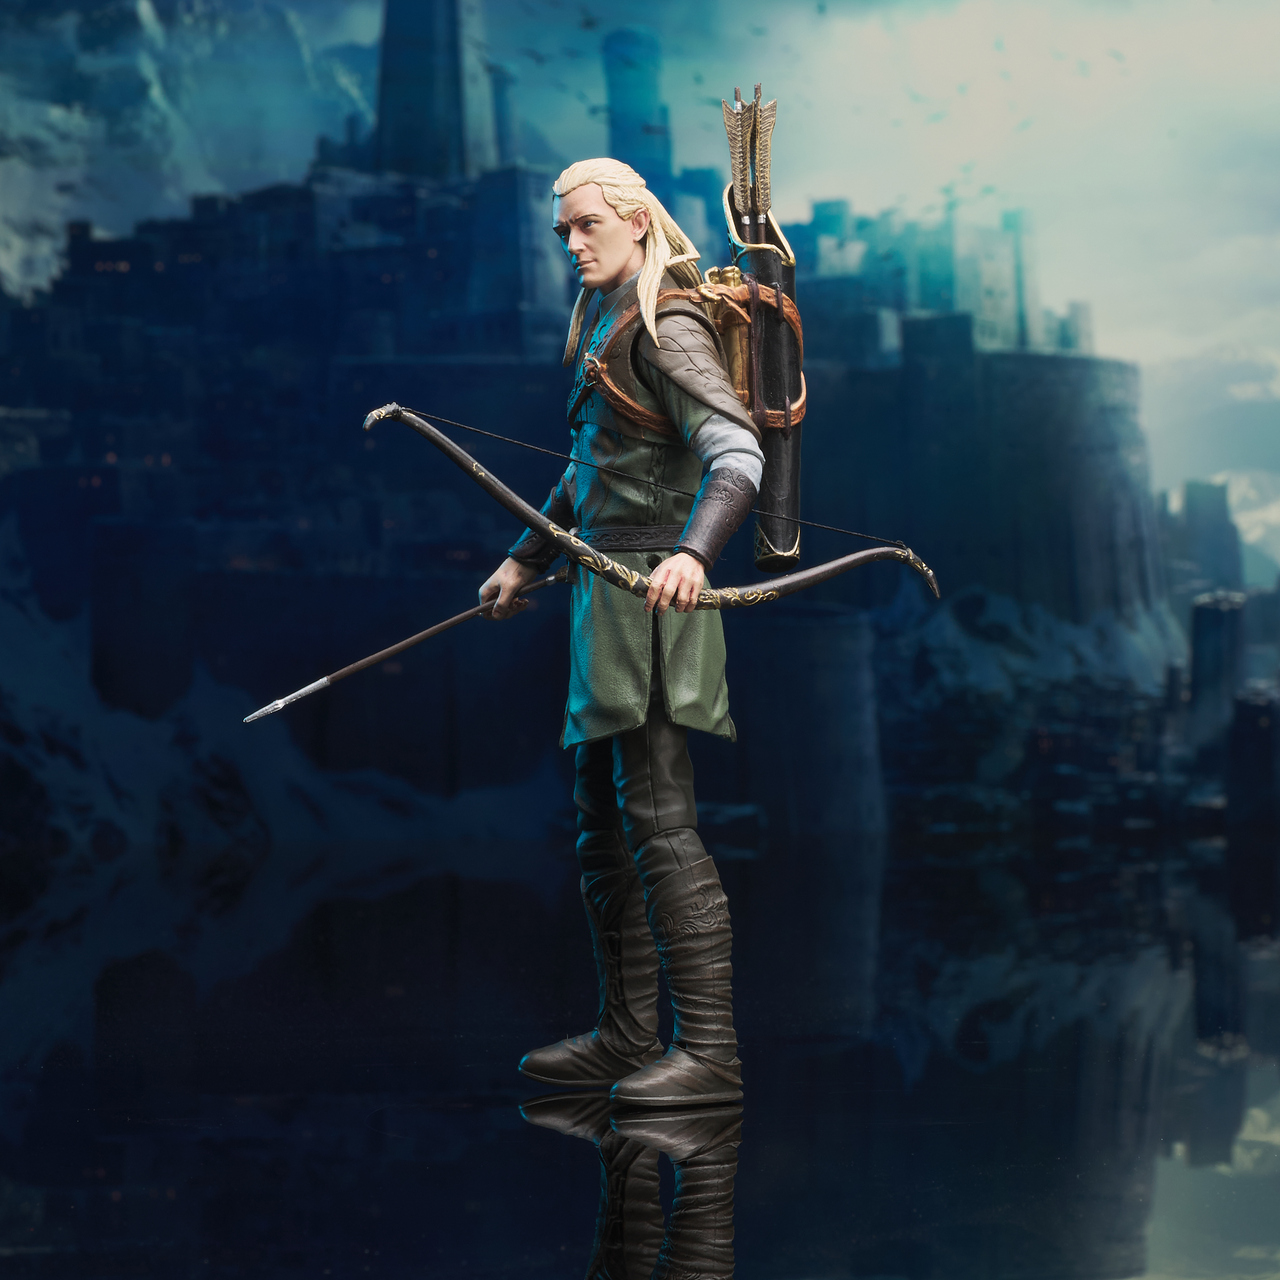 Lord of the Rings Select Actionfigur 18 cm Legolas  699788838570